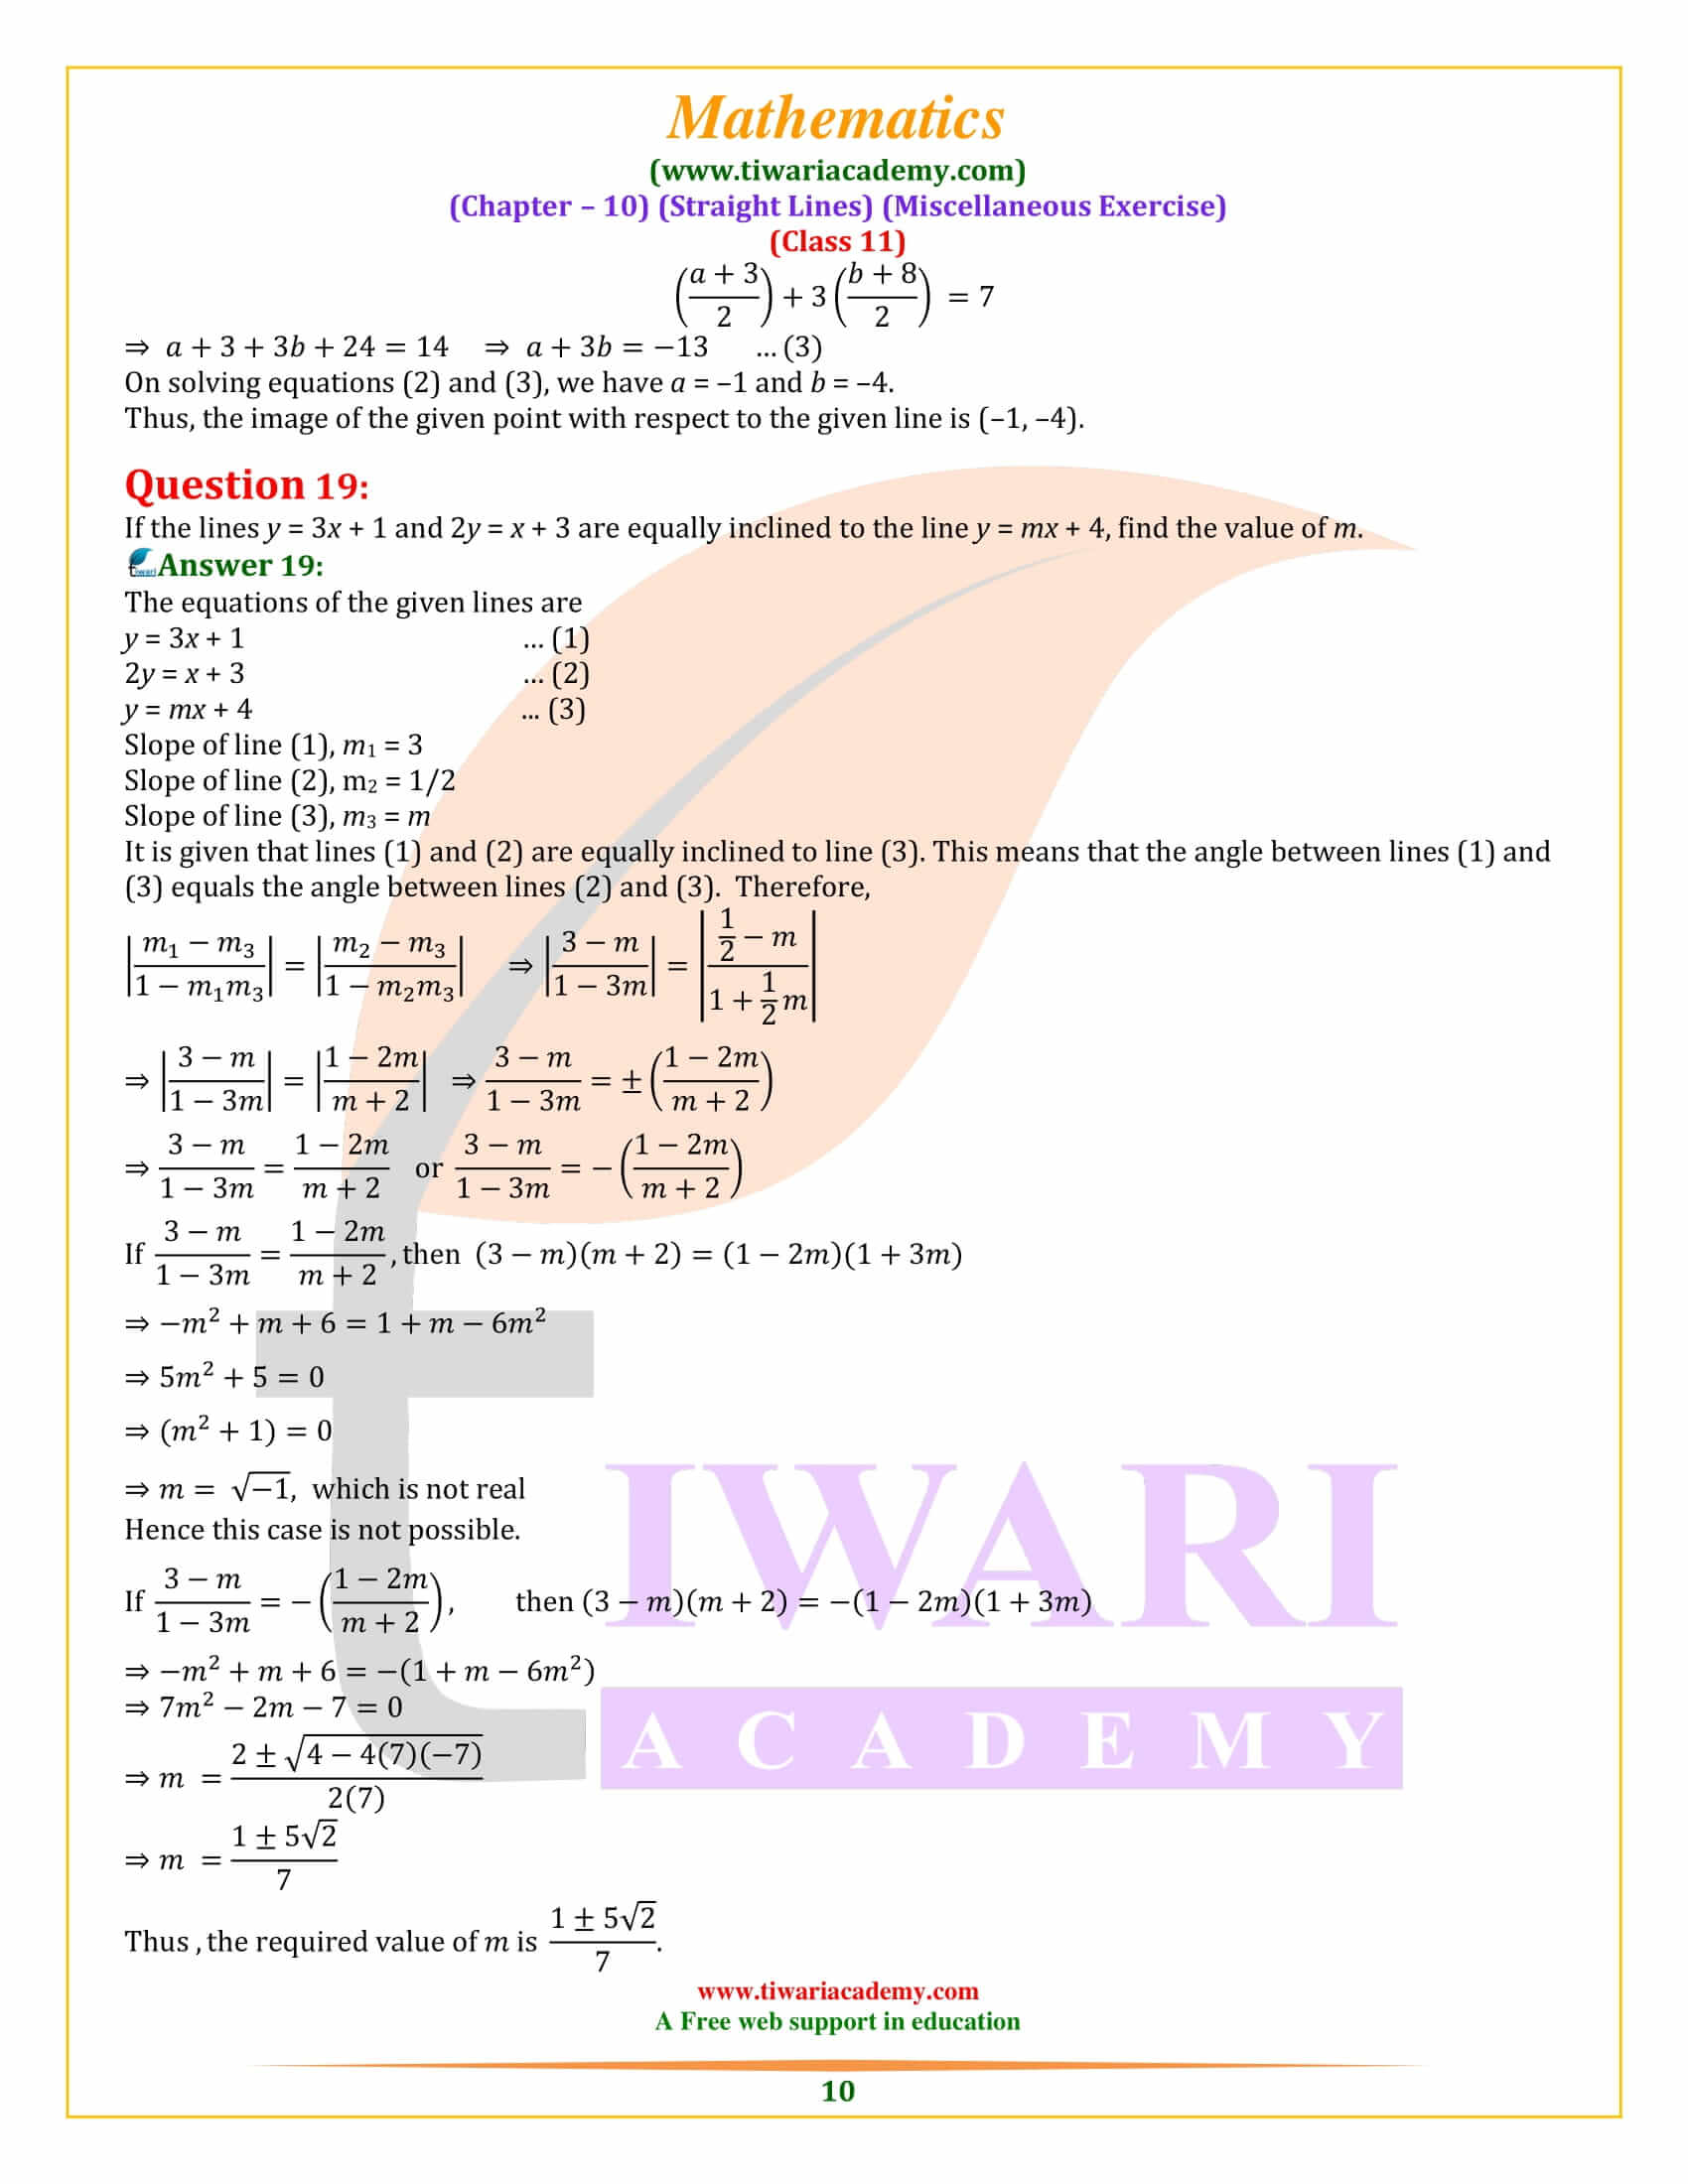 NCERT Solutions for Class 11 Maths Chapter 10 Miscellaneous Exercise free